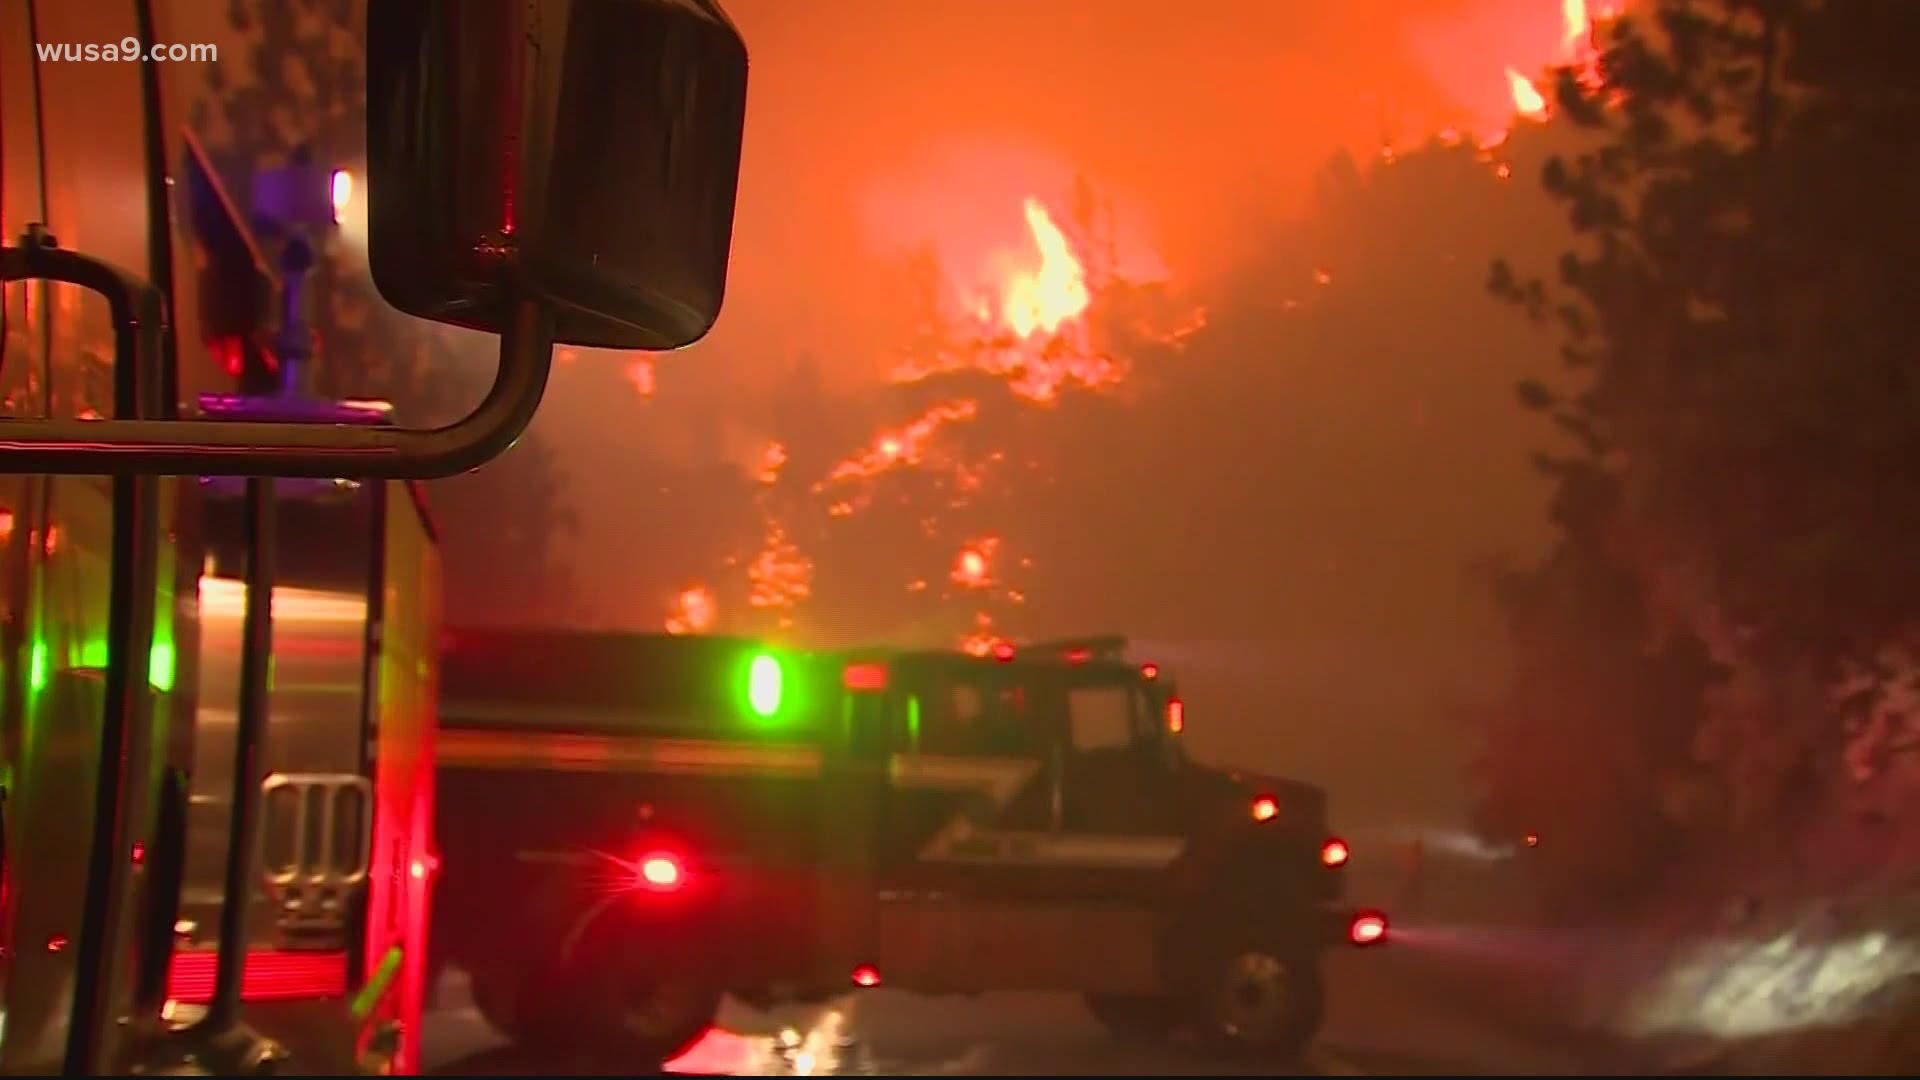 As deadly wildfires engulf states on the West Coast, crews from the DC region have traveled to assist in the fight to stop the spread of flames.